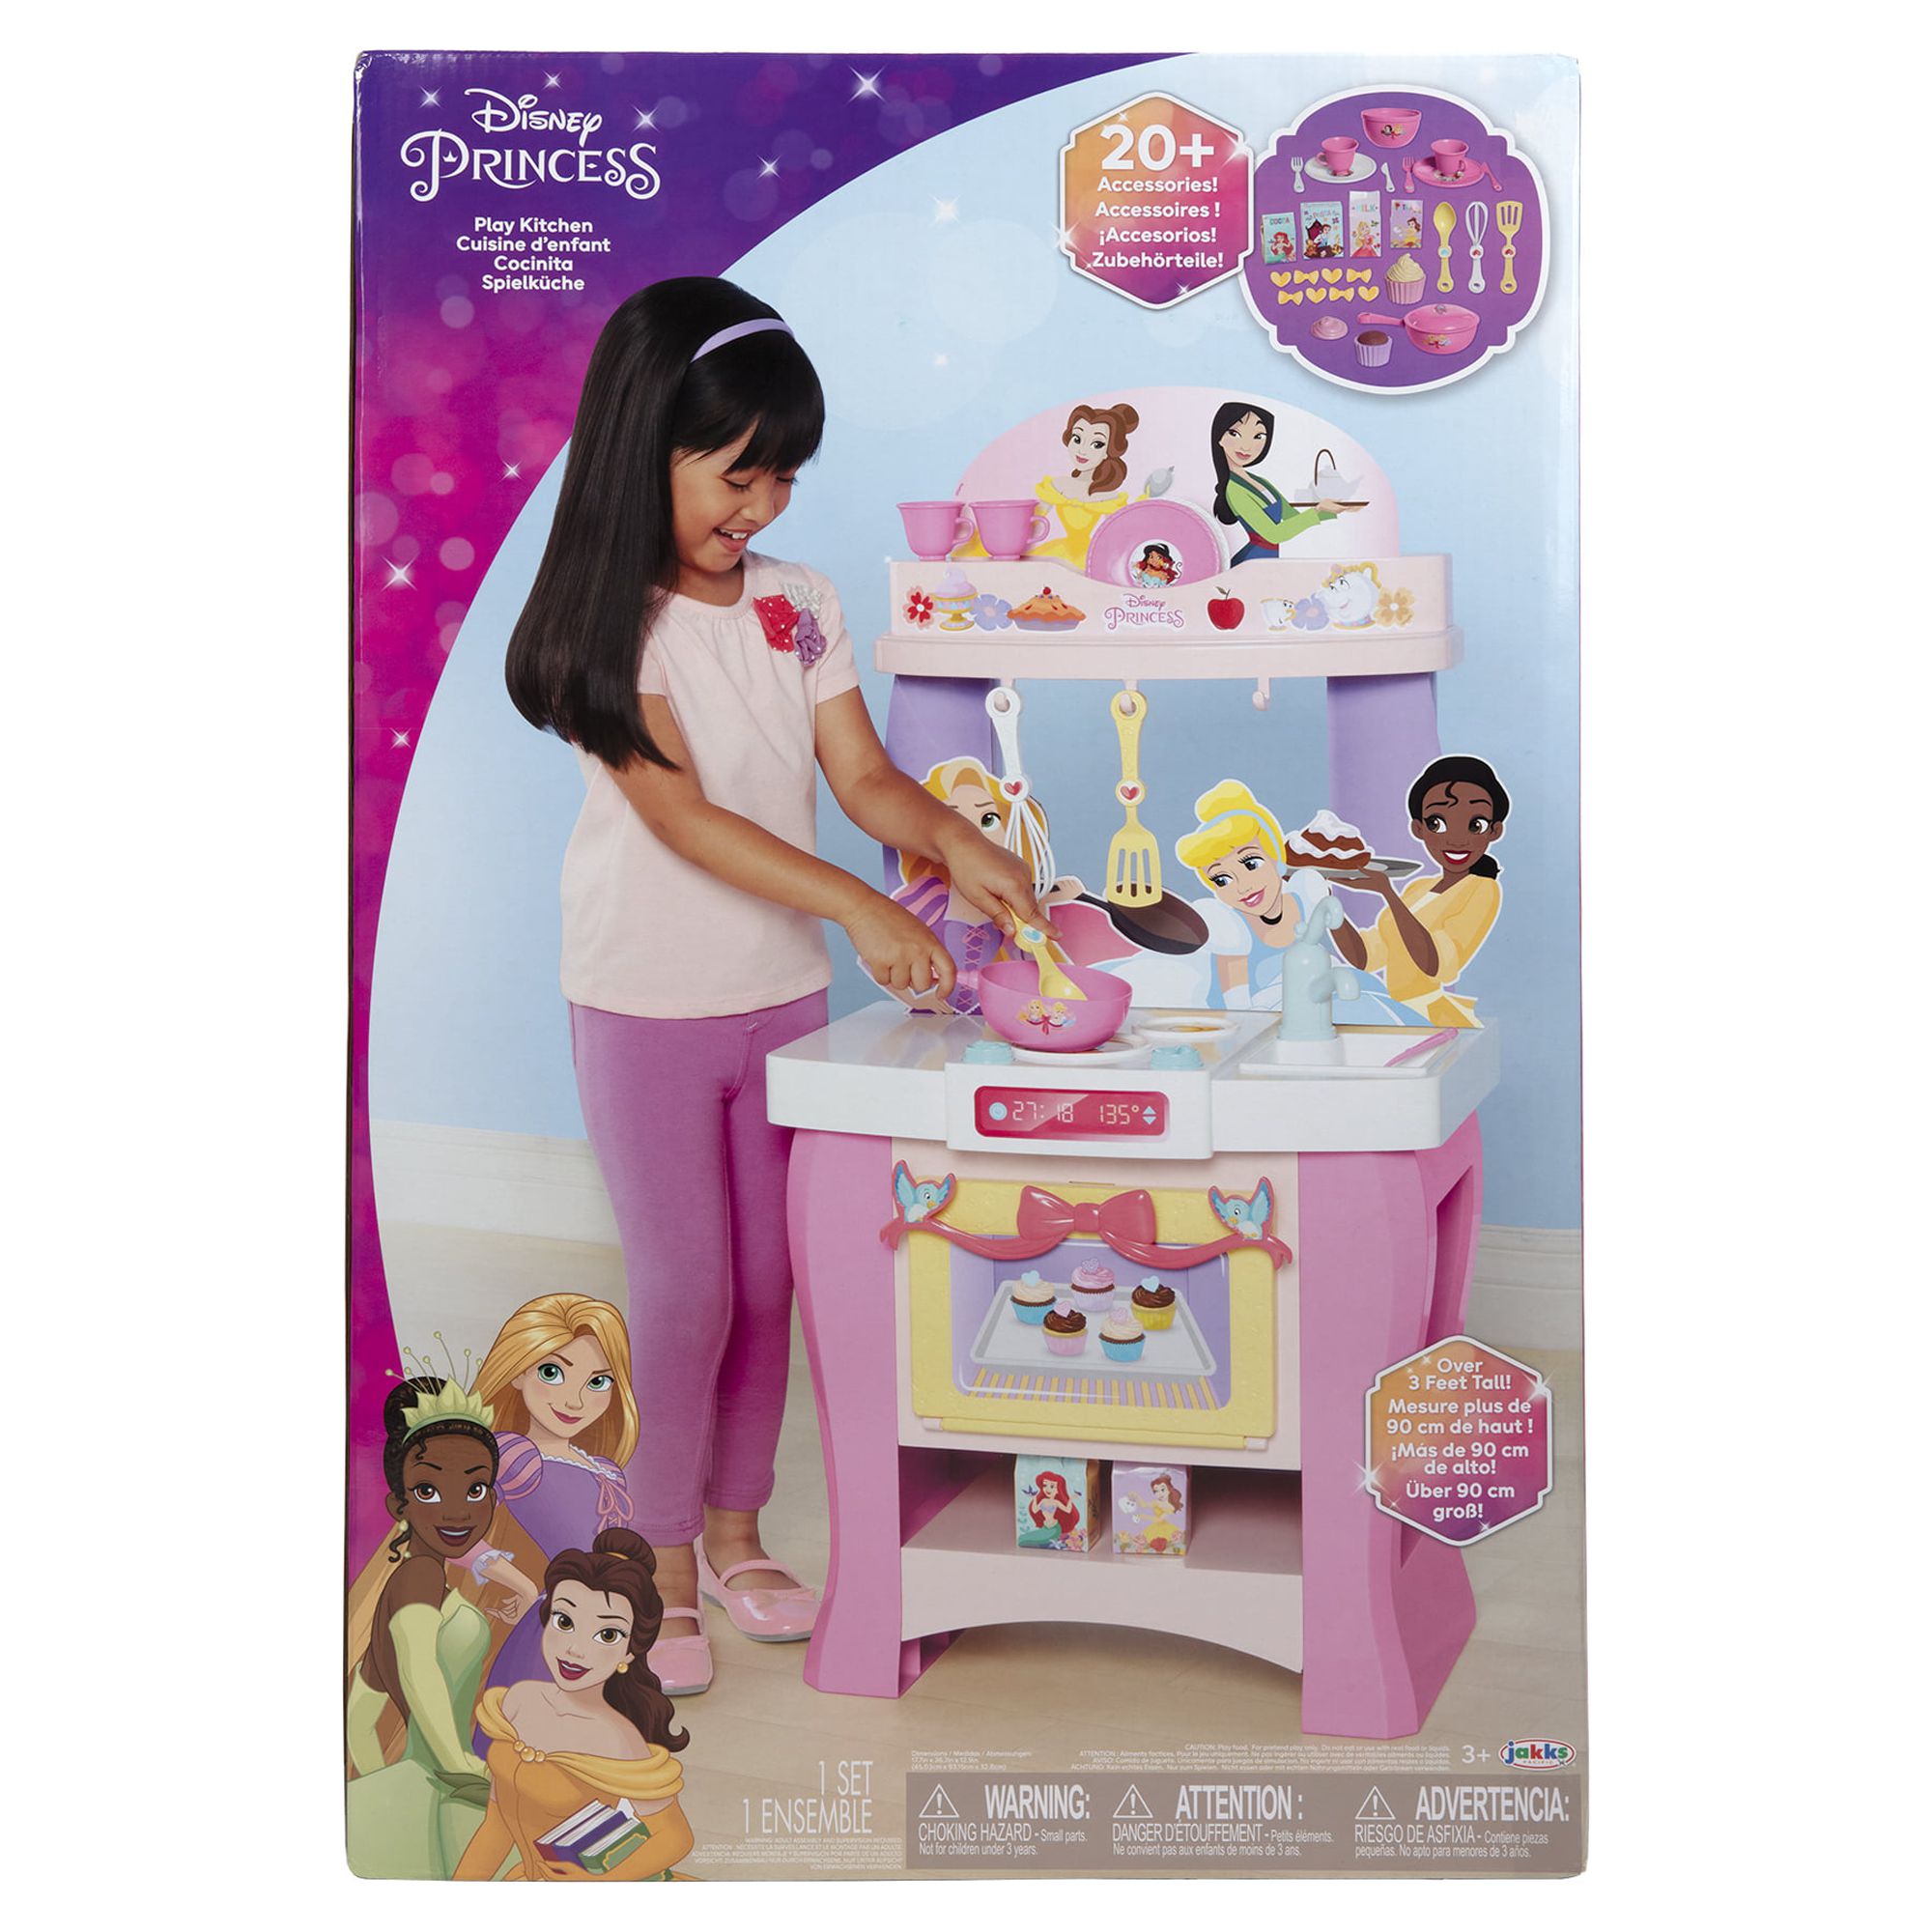 Disney Princess Play Kitchen Includes 20 Accessories, over 3 Feet Tall - image 2 of 6